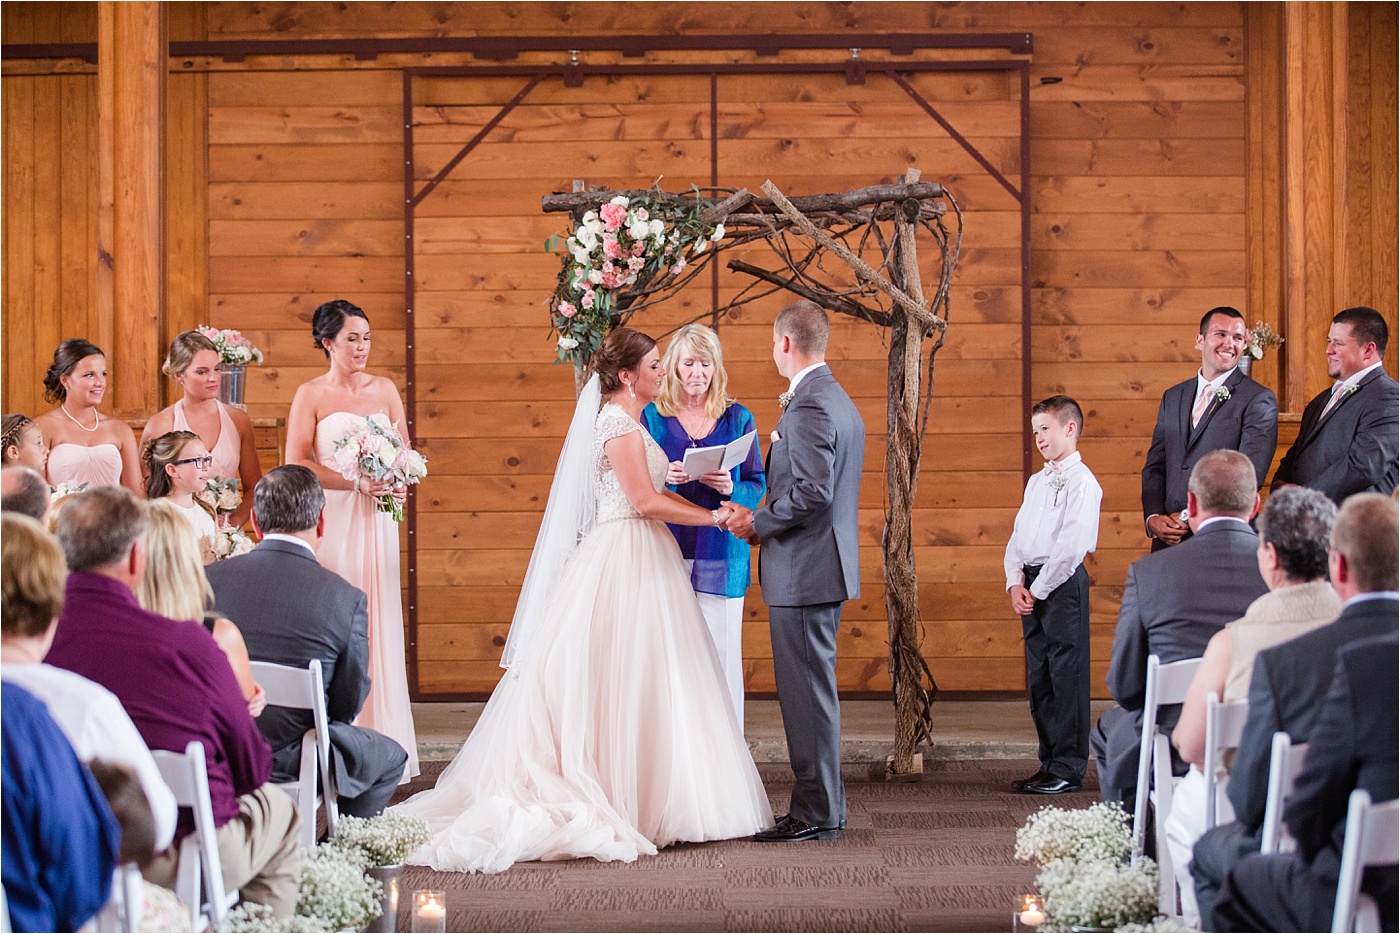 A Blush Outdoor wedding at Irongate Equestrian | KariMe Photography_0091